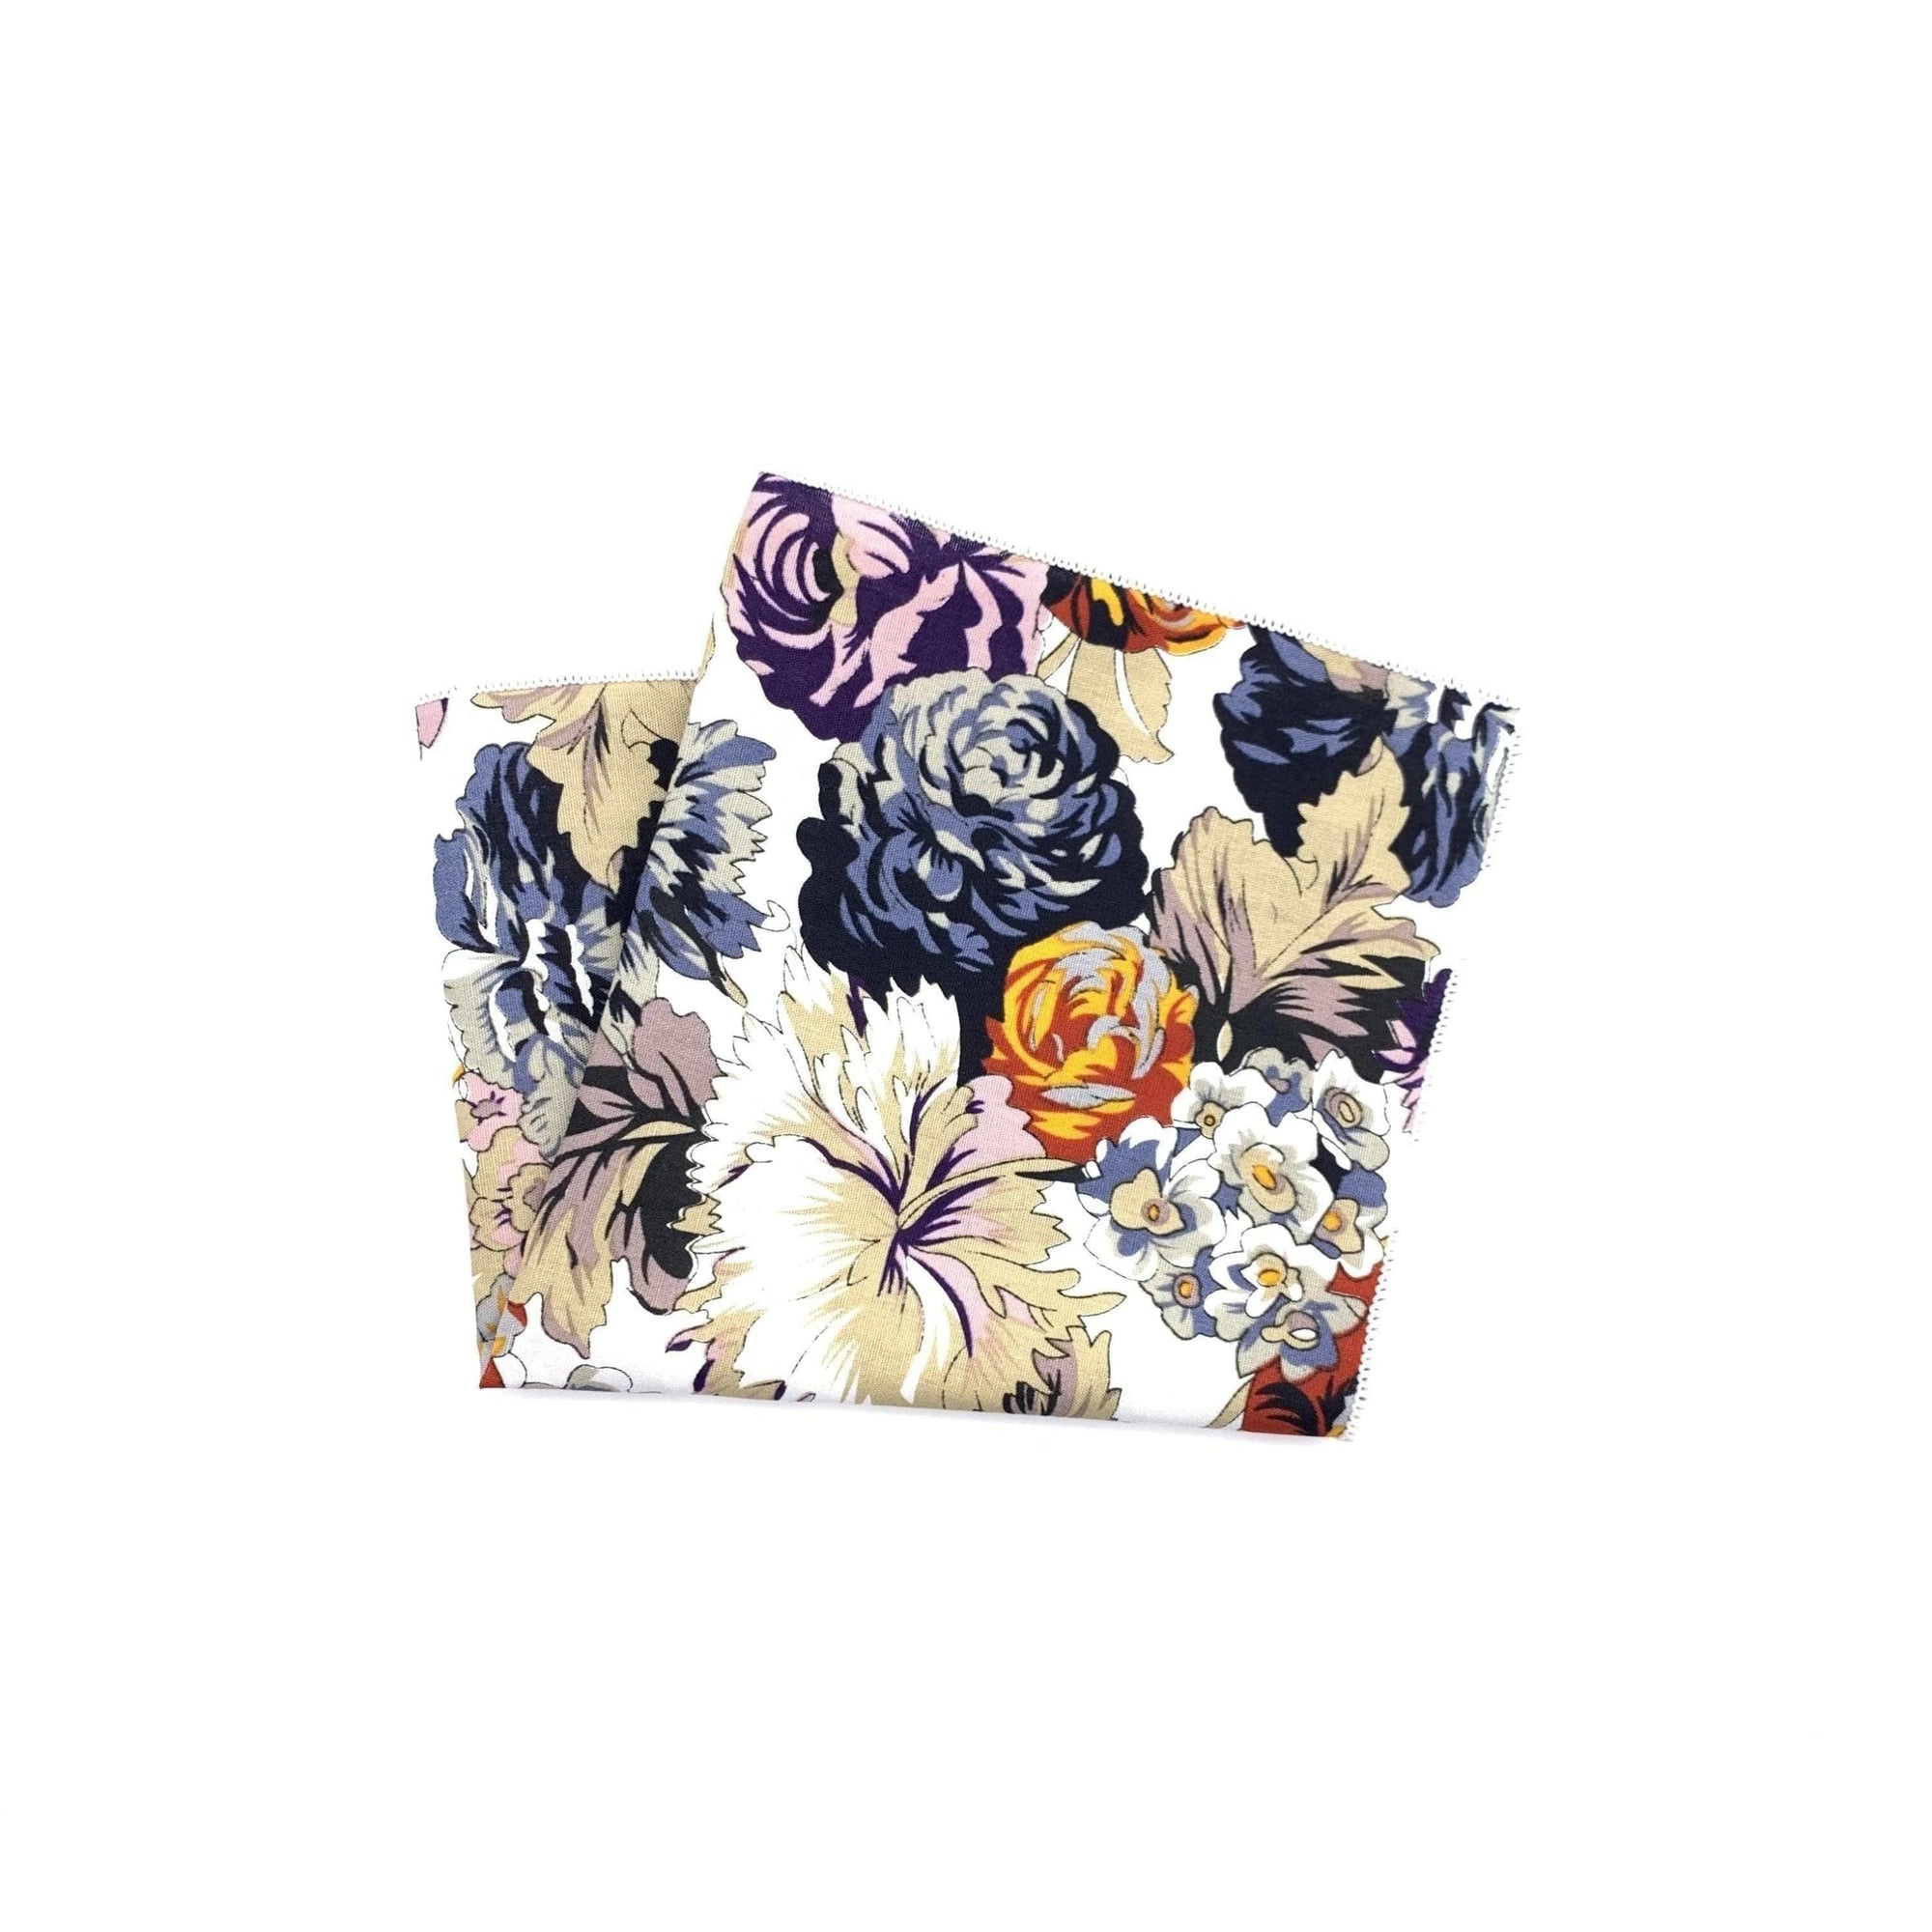 DUKE Floral Pocket Square Mytieshop Material: CottonItem Length: 23 cm ( 9 inches)Item Width : 22 cm (8.6 inches) Ba Great for: Groom Groomsmen Wedding Shoots Formal Prom Fancy Parties Gifts and presents